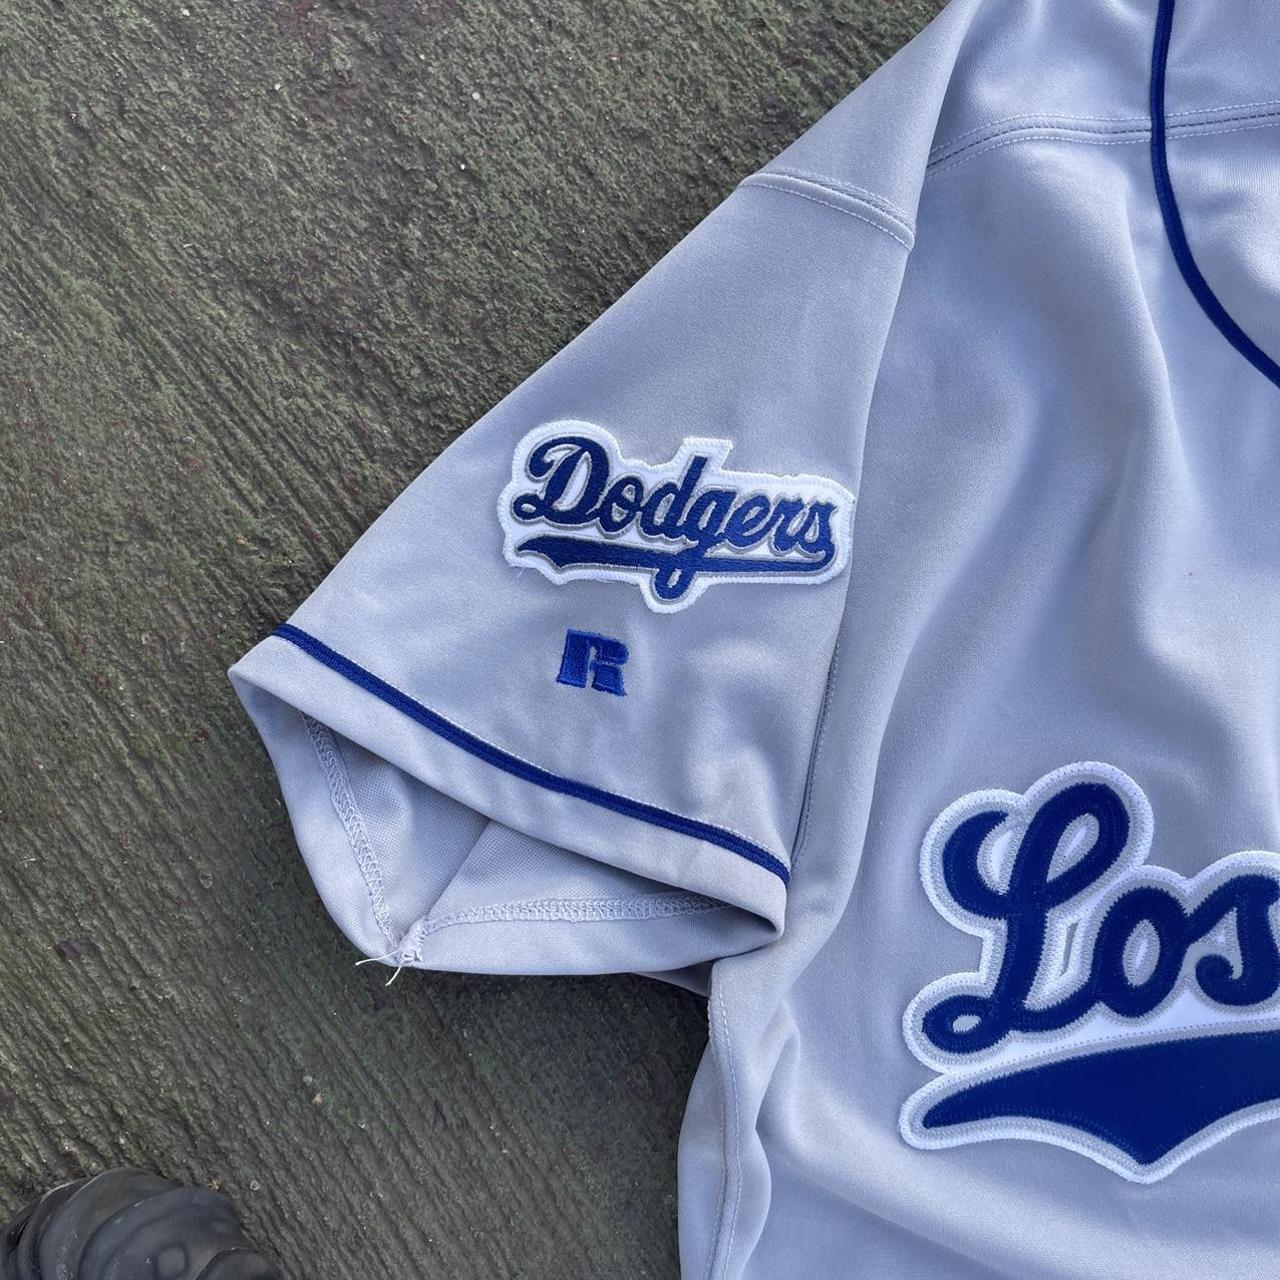 dodgers russell jersey